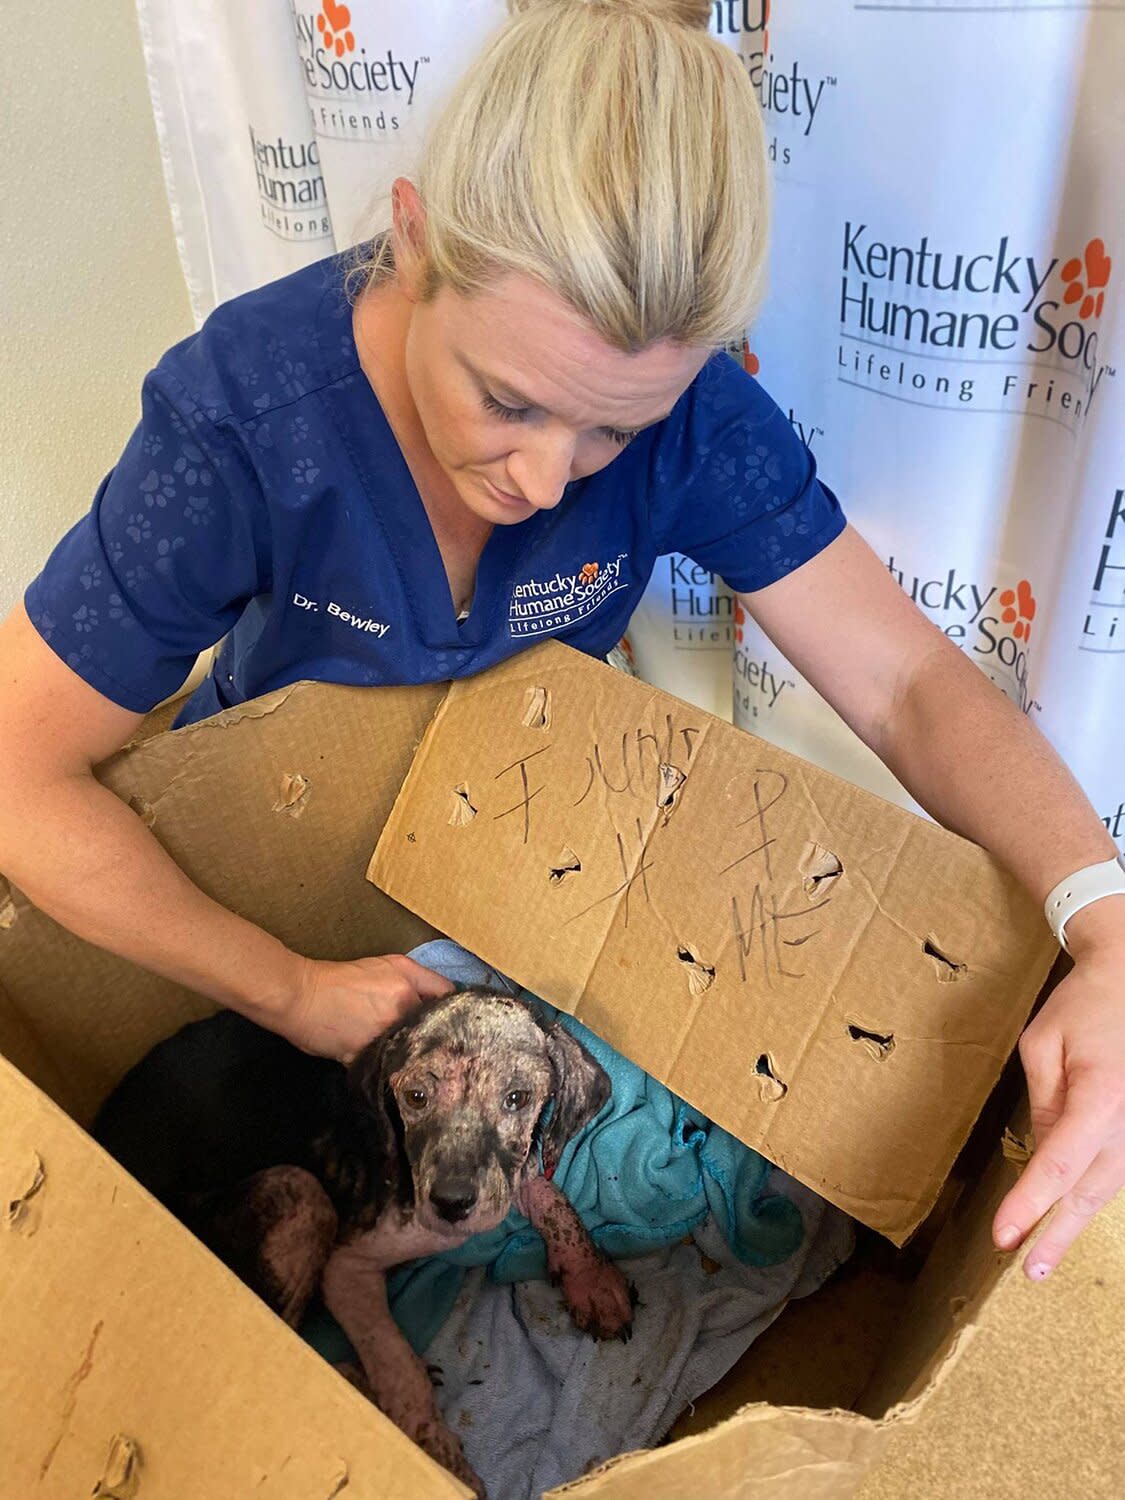 dog found in help me box